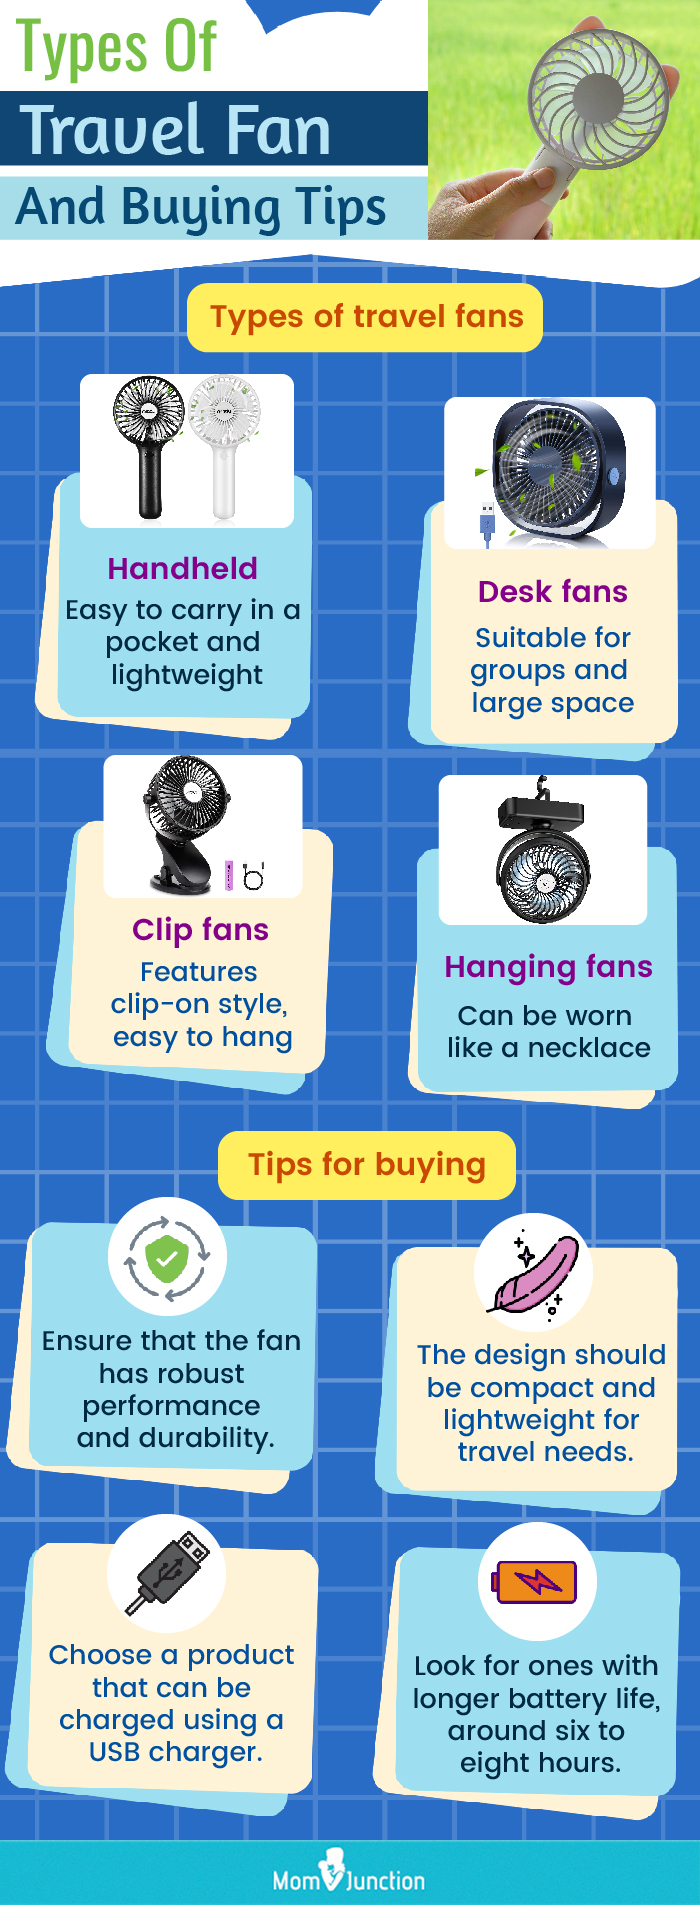 Types Of Travel Fan And Buying Tips (infographic)